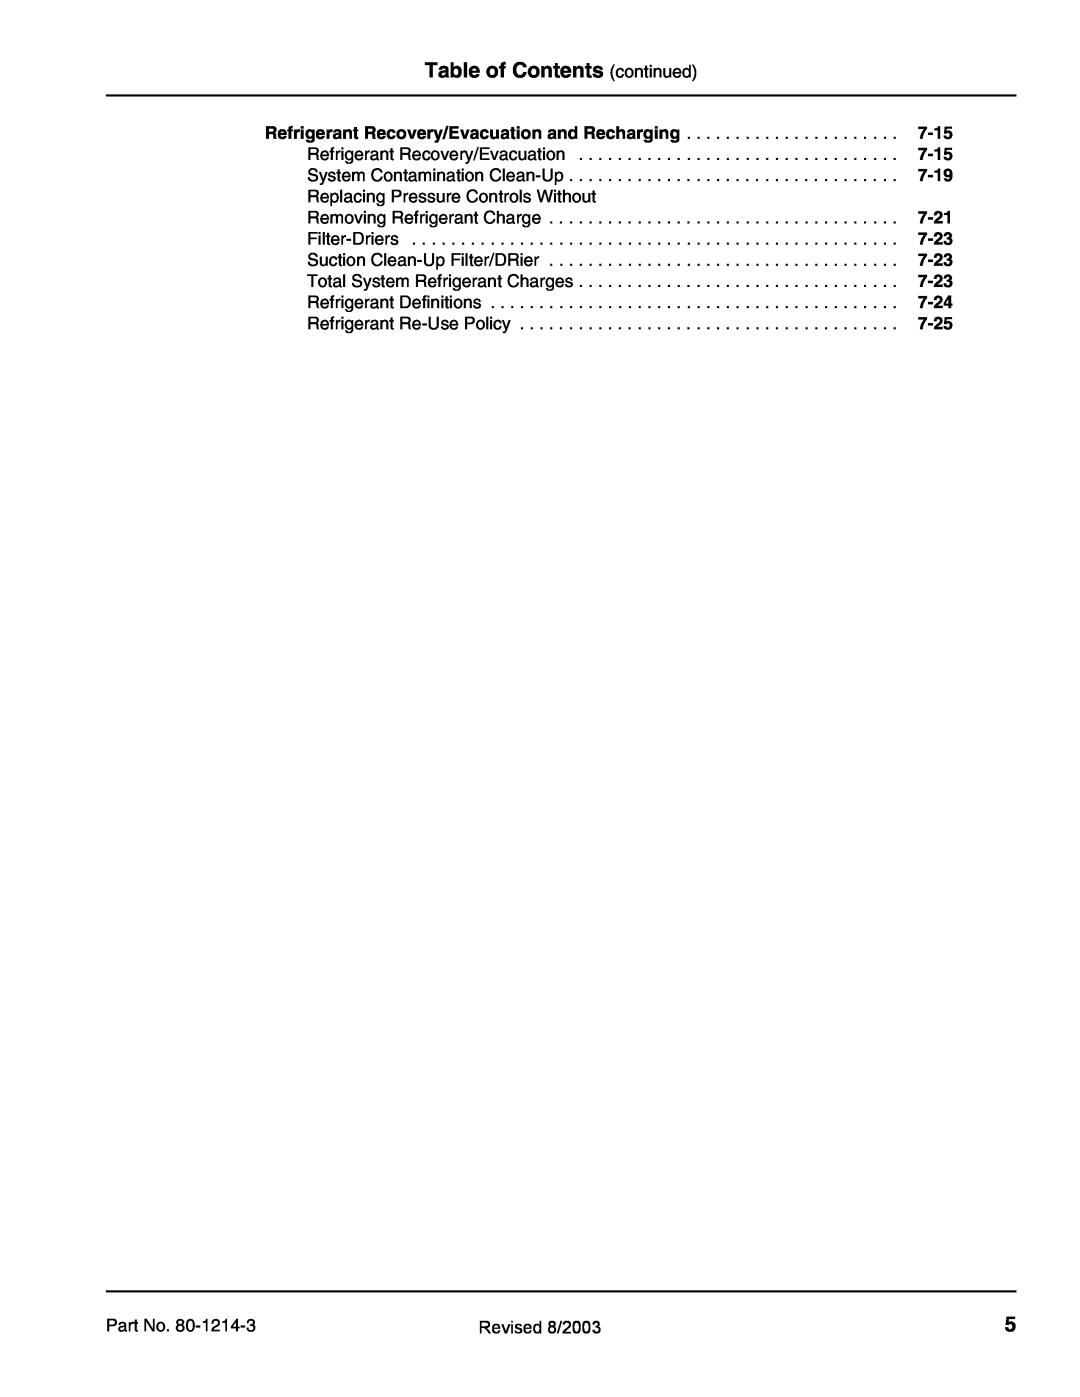 Manitowoc Ice QC0700, QF2300, QF0800, QF0400, QF2200 service manual Table of Contents continued 